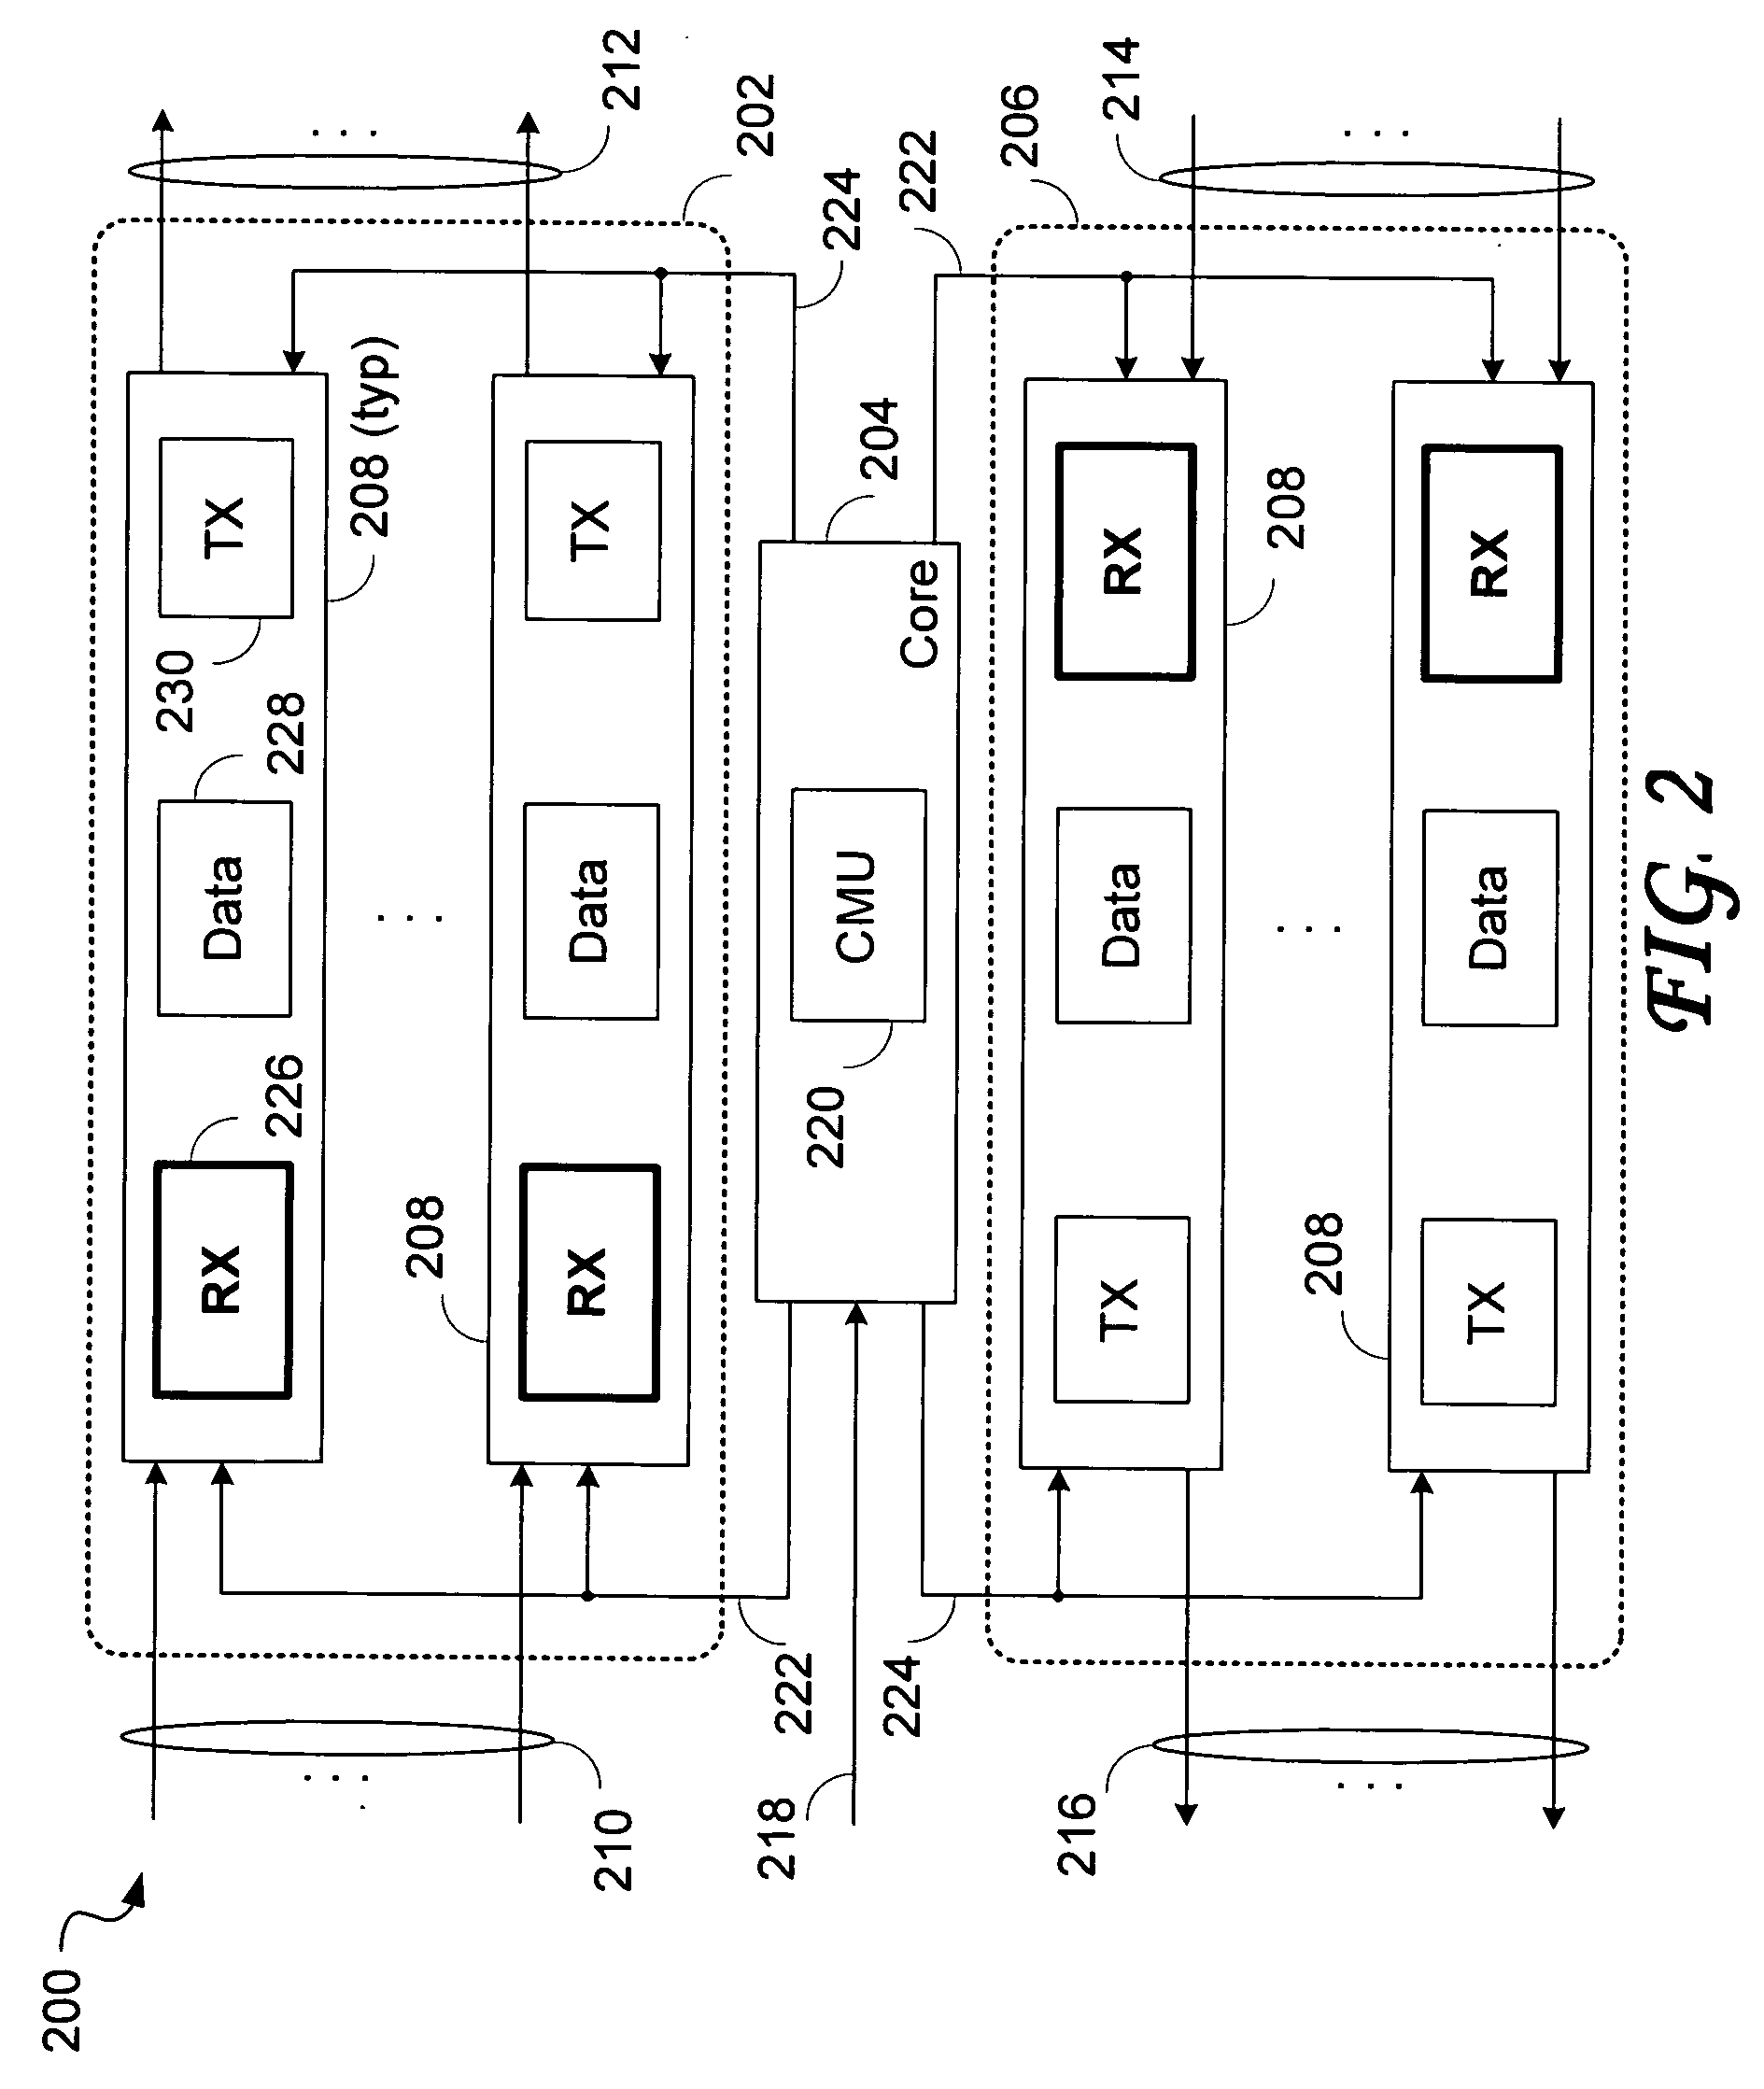 Linear phase interpolator and phase detector